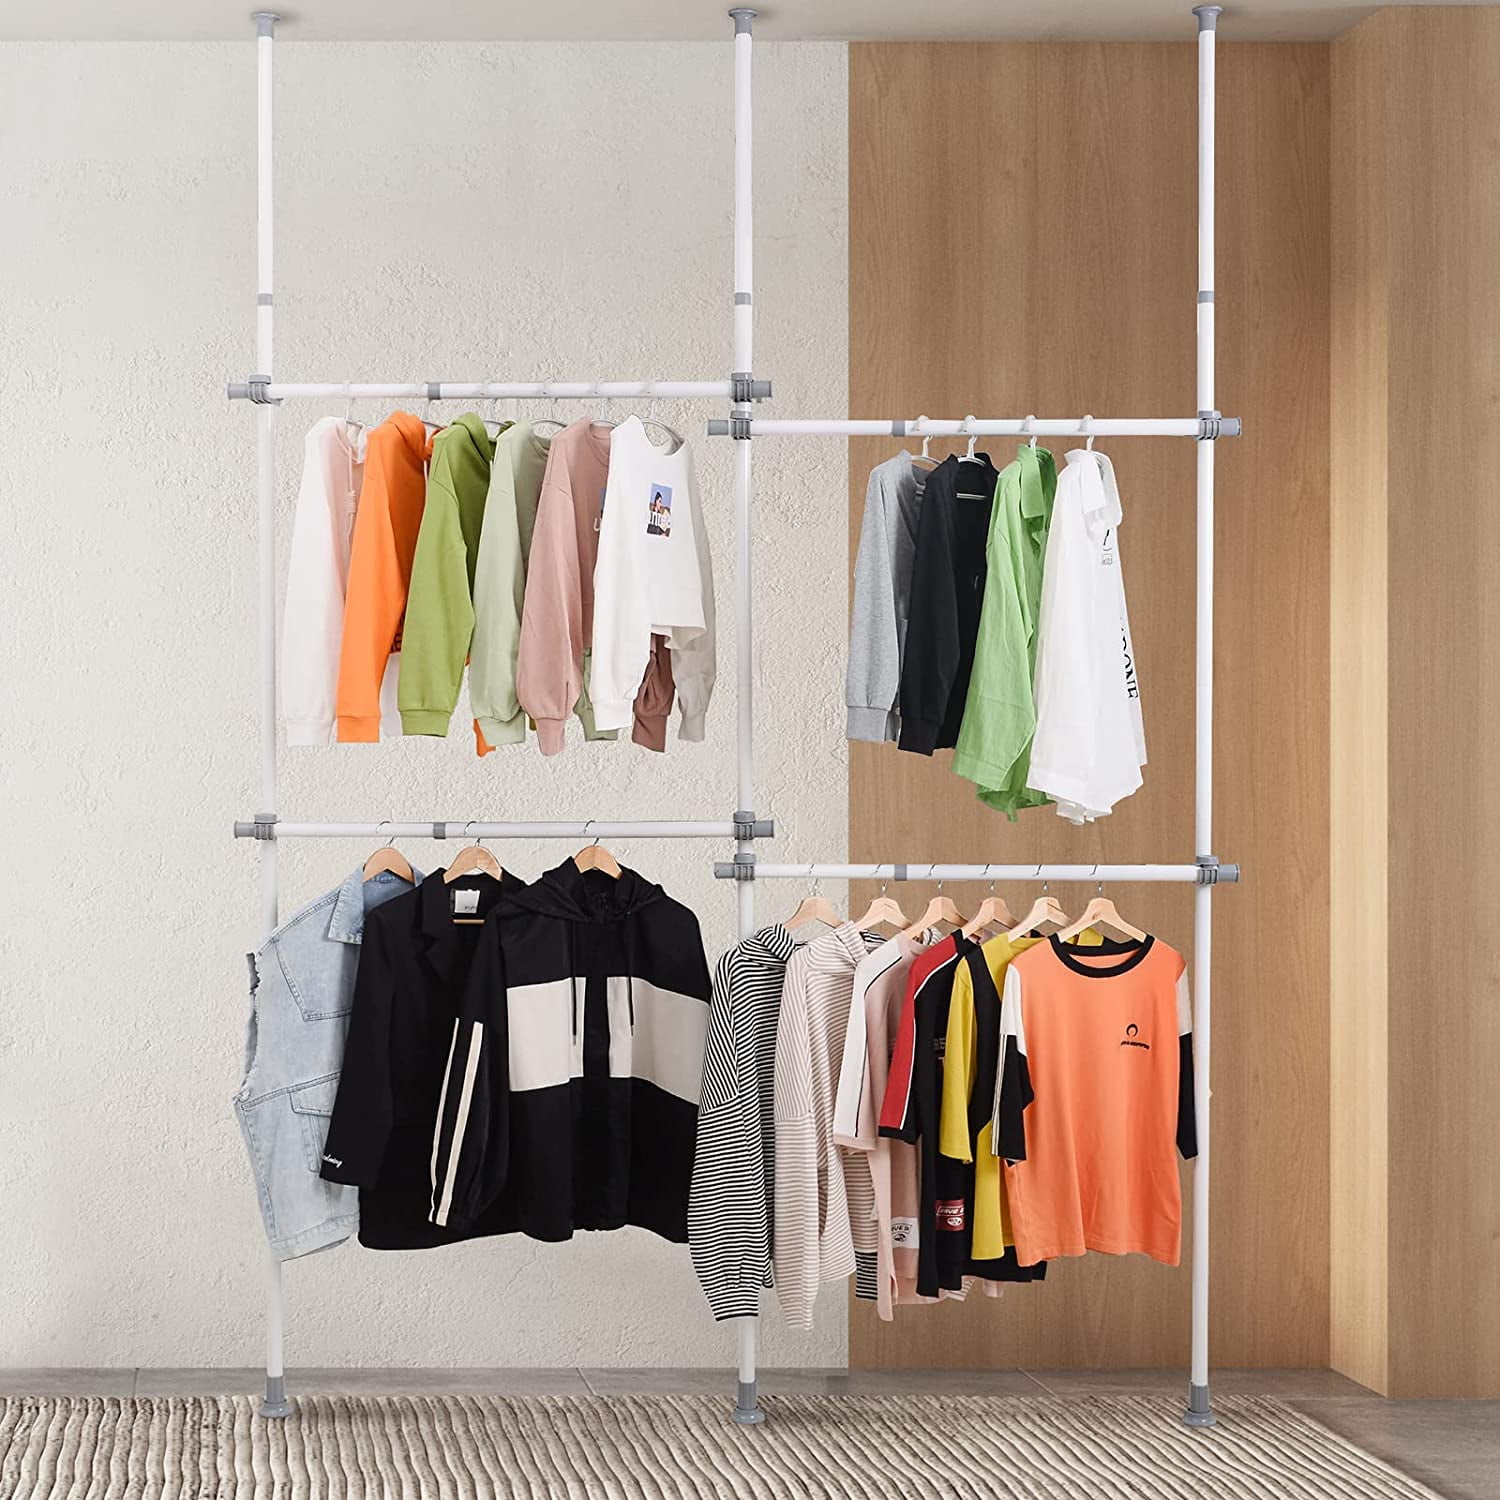 Double Clothing Rack Shelves, Department Store Clothing Rack